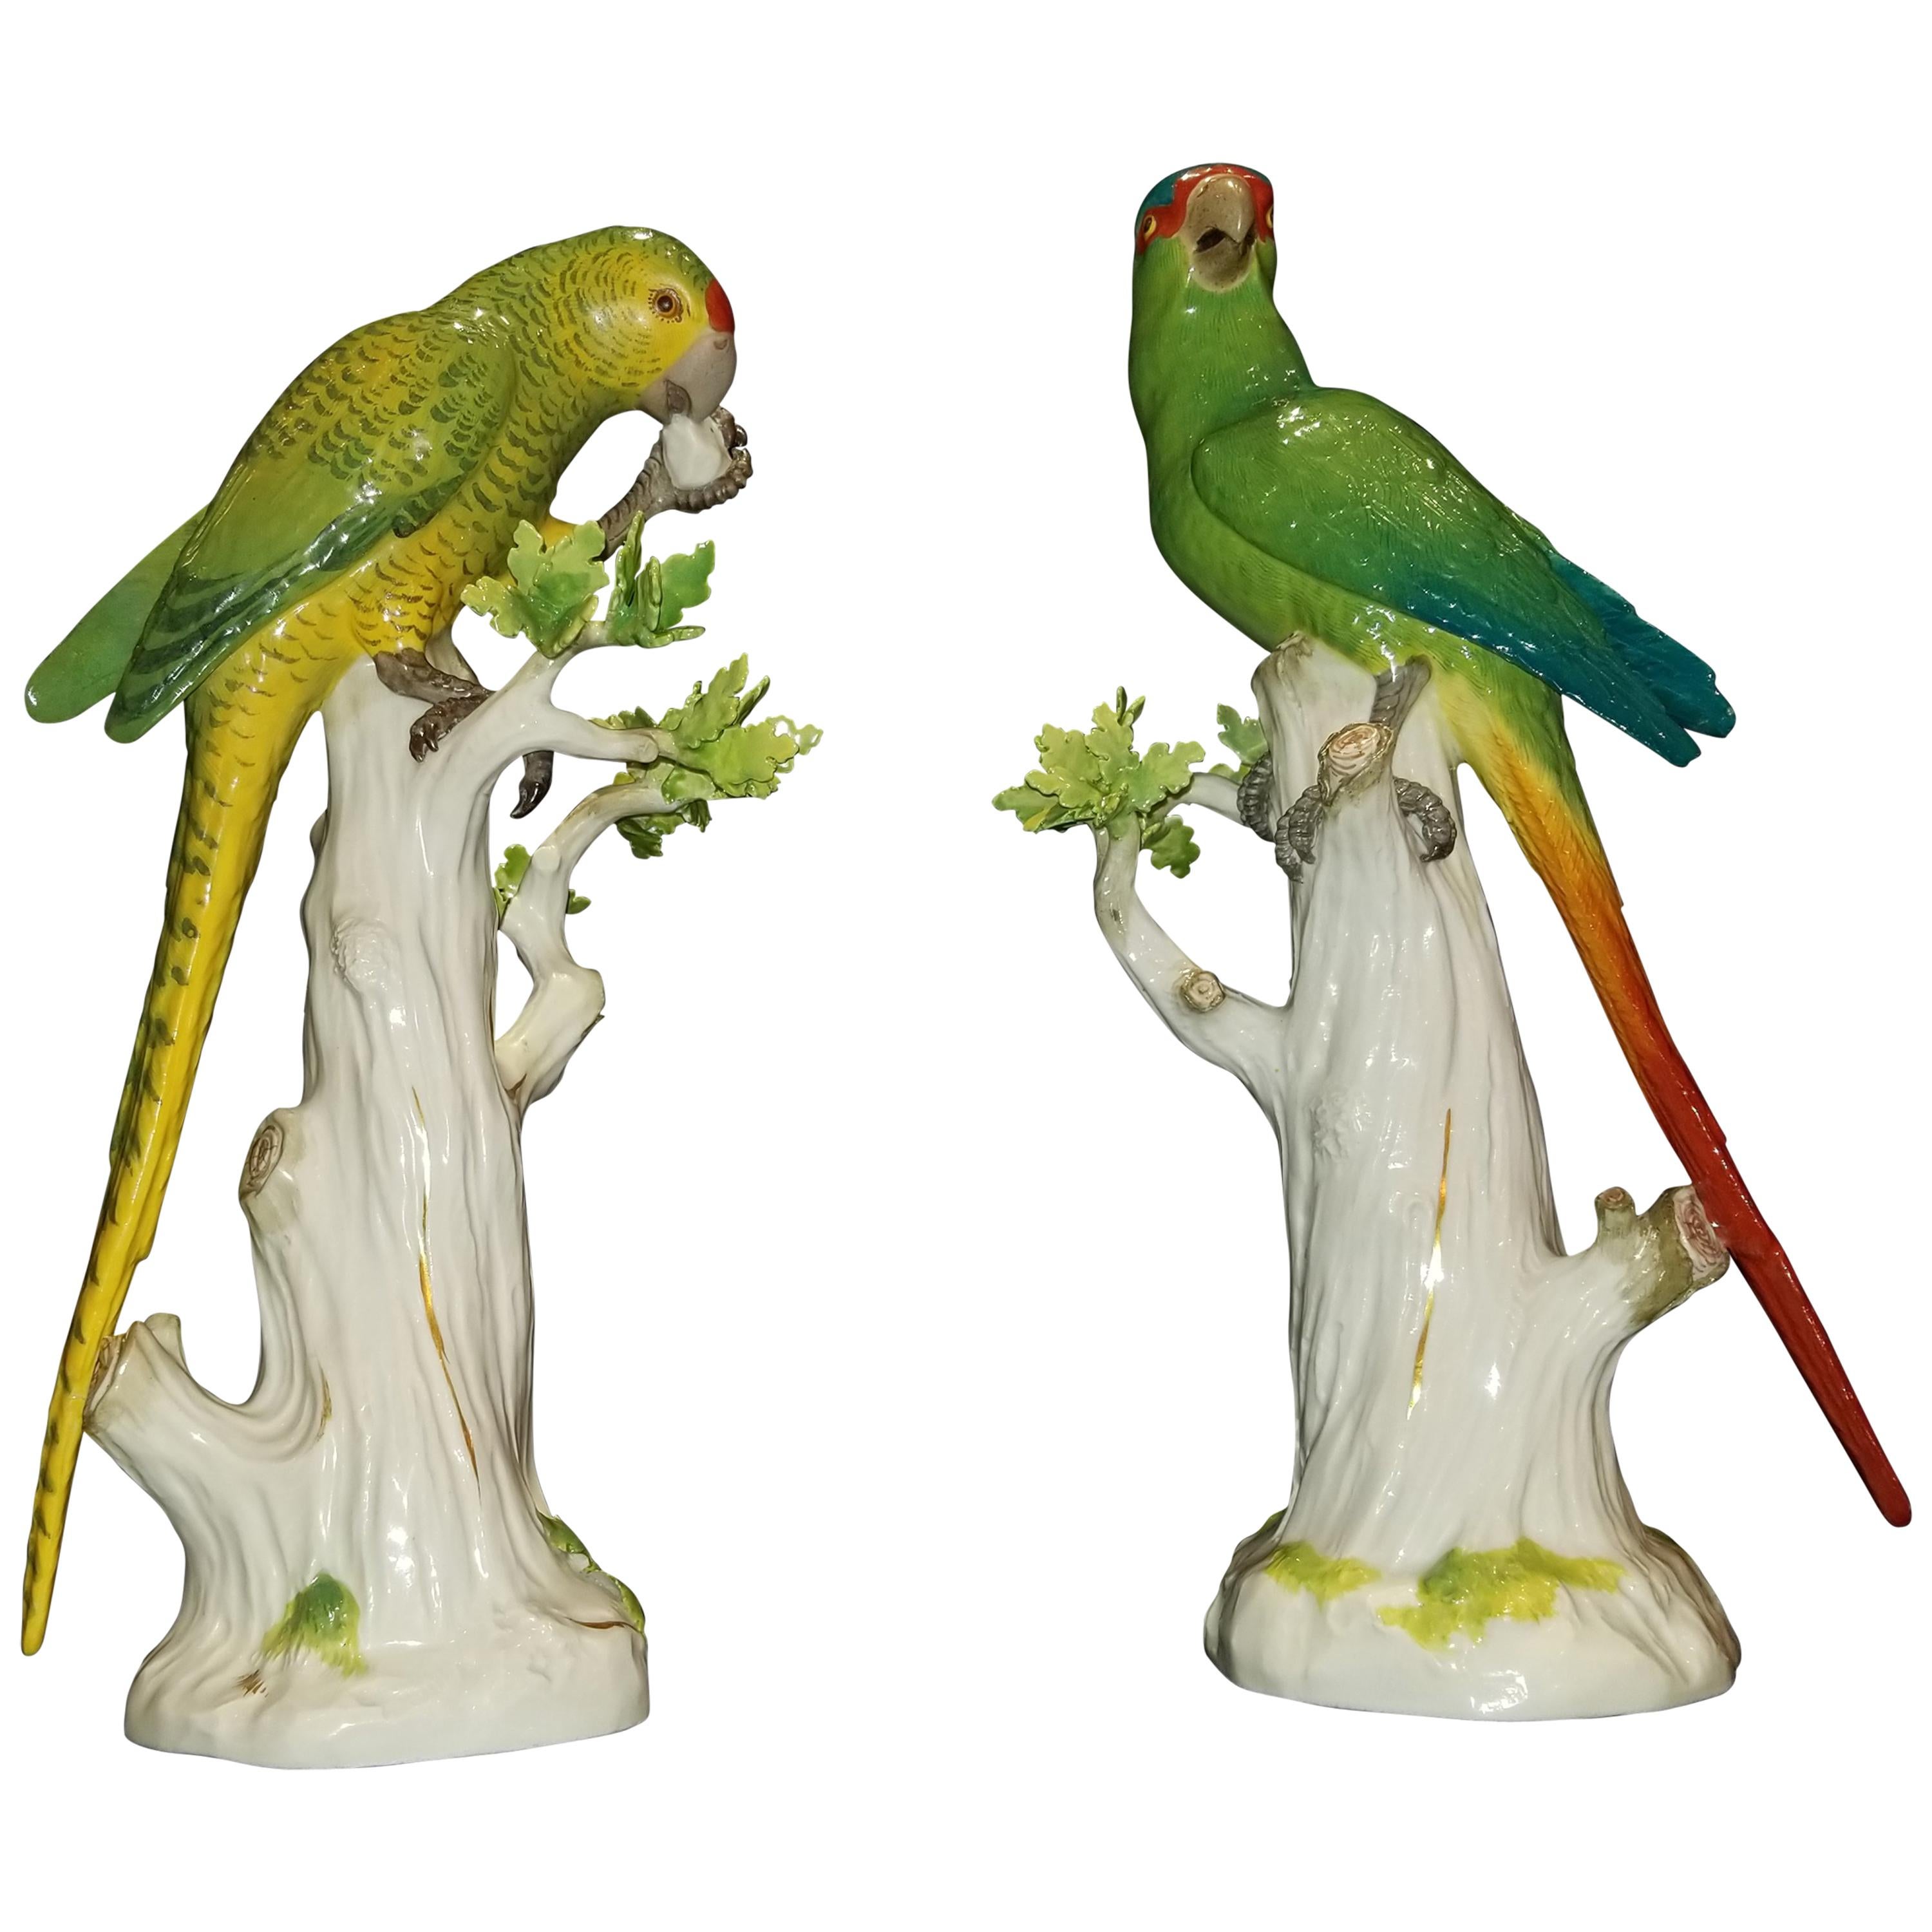 Meissen Porcelain Figures of Parrots Standing on Tree Branches with Leaves, Pair